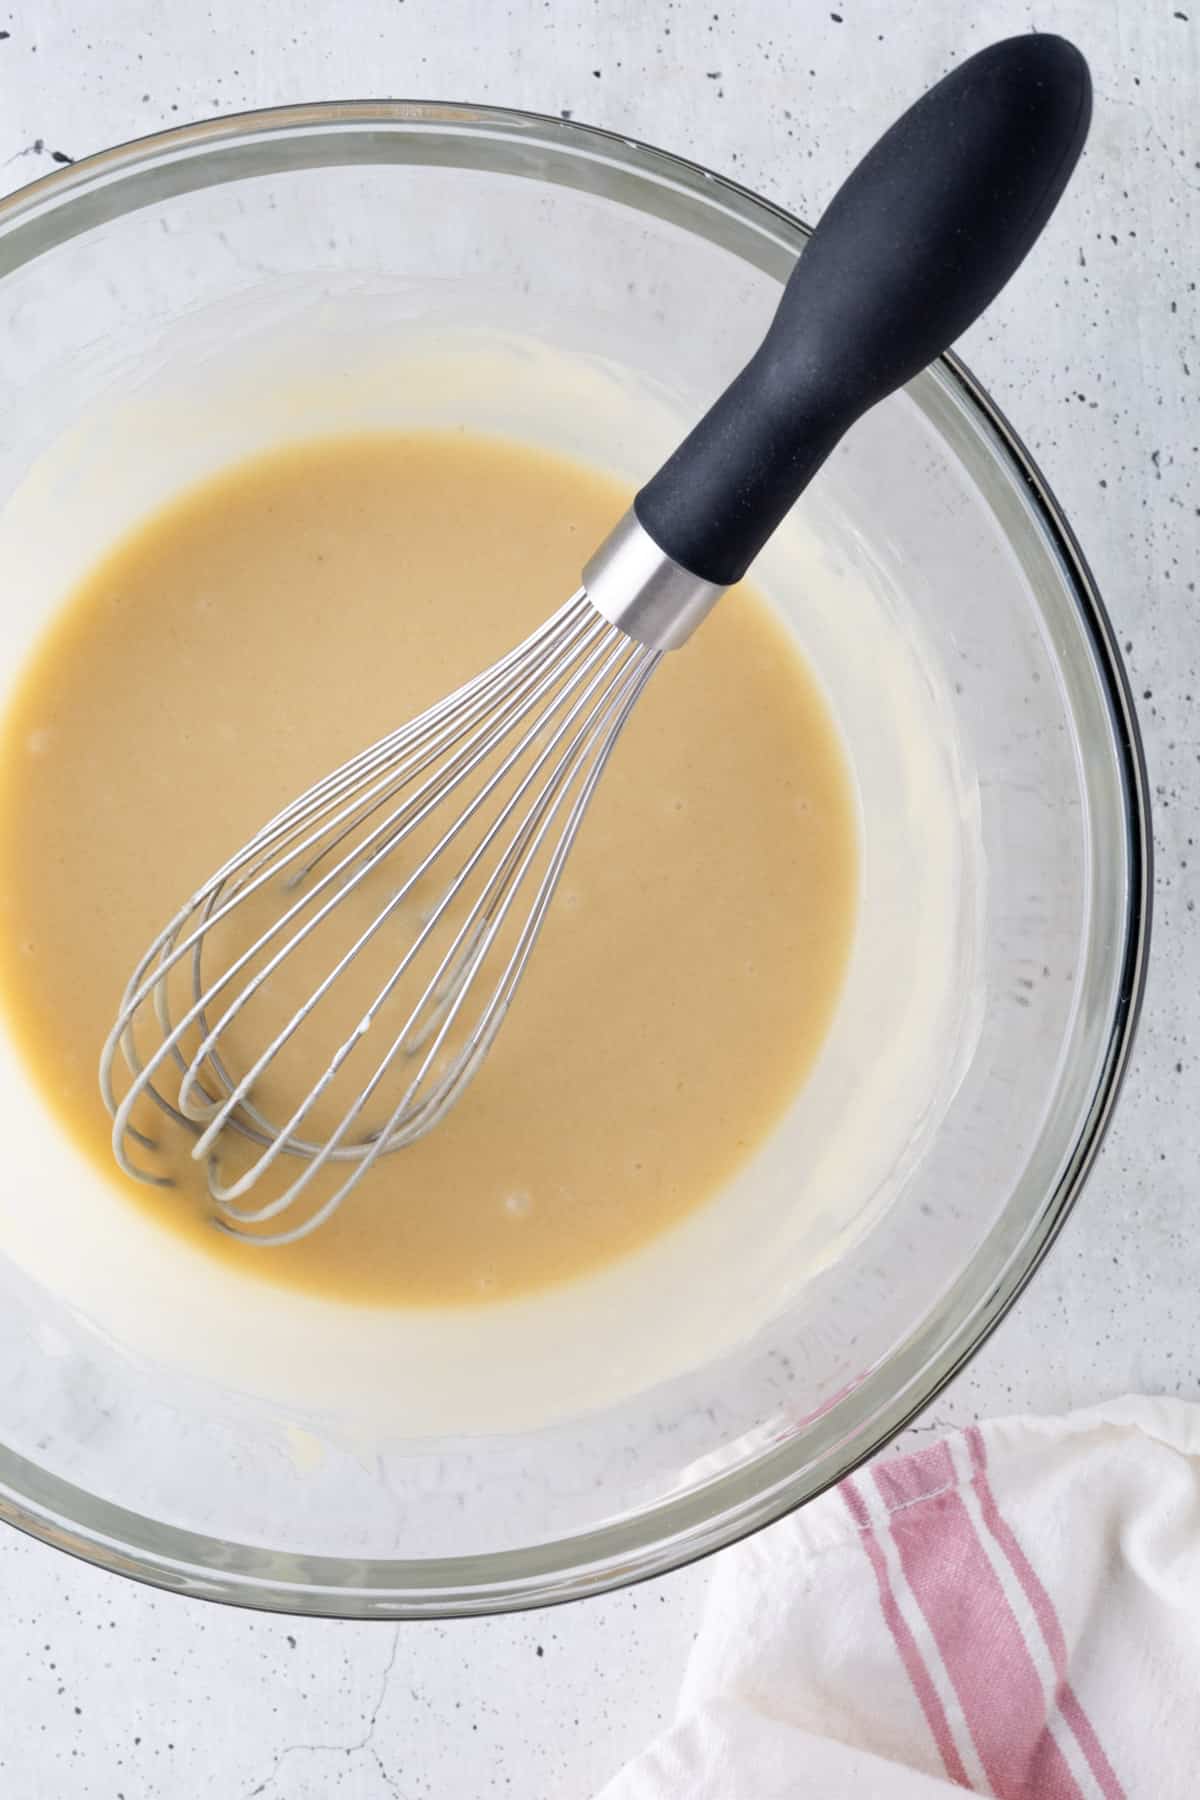 The wet ingredients in a large bowl with a whisk.